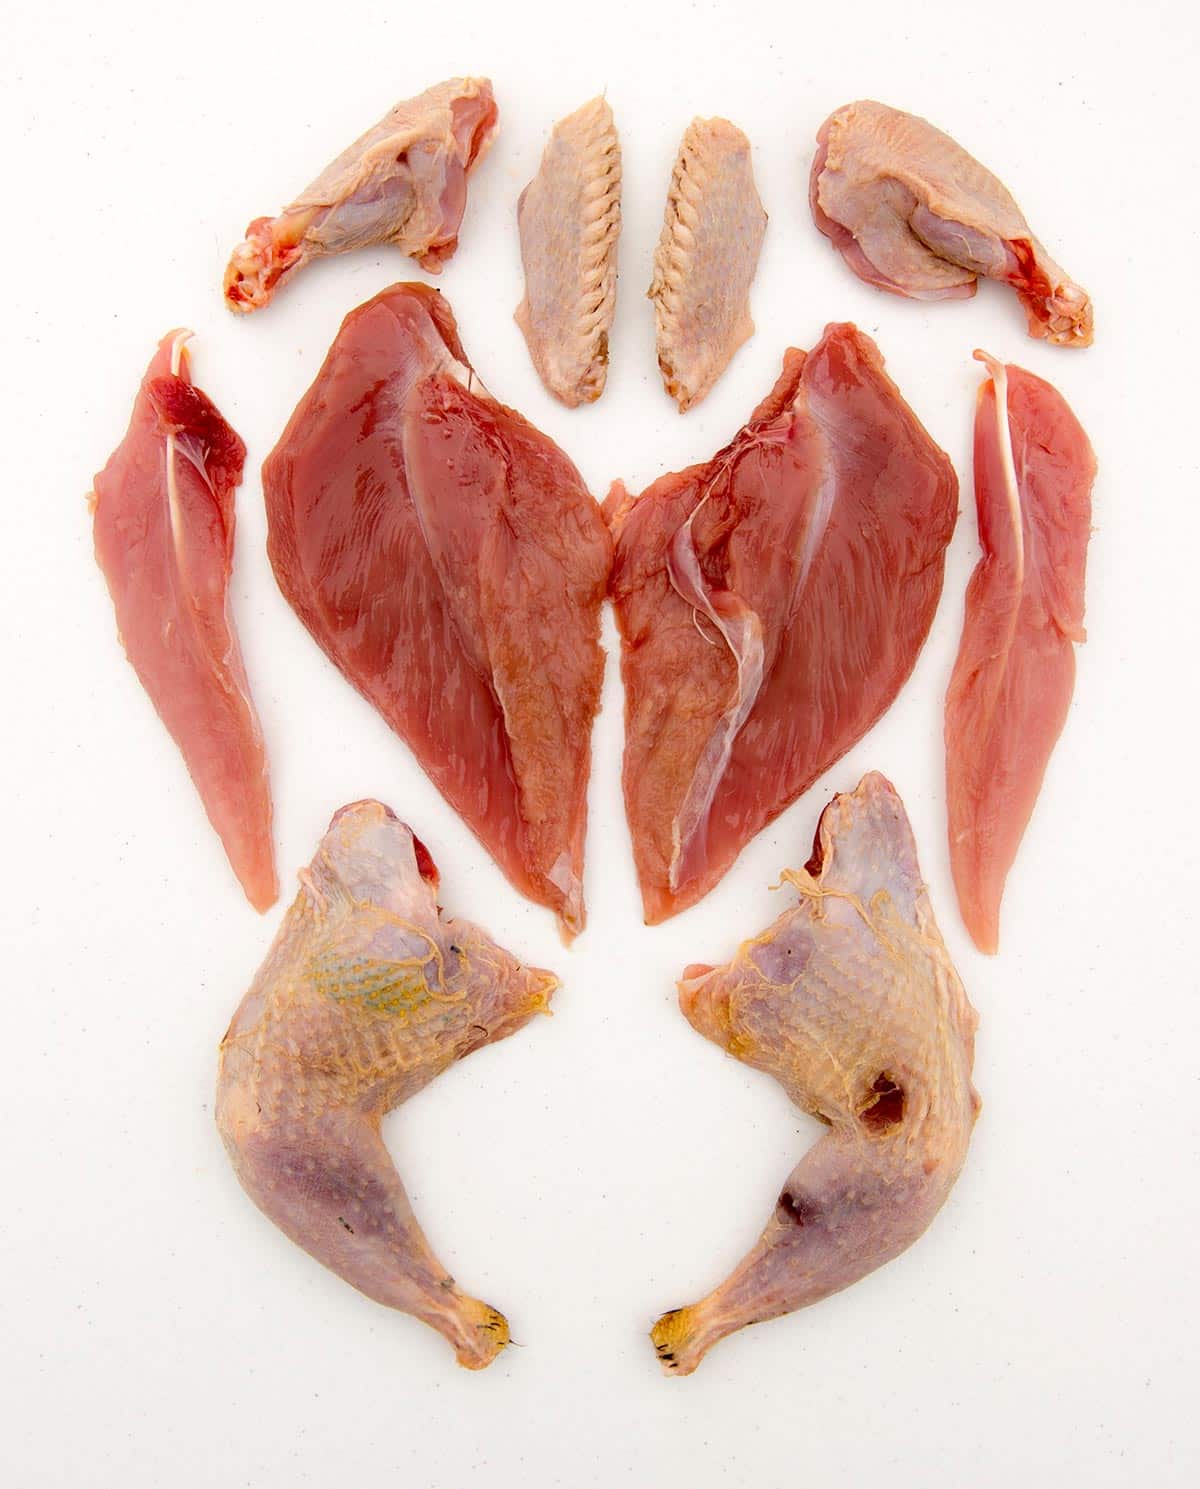 The end result of cutting a chicken into its parts, laid out on a table. 